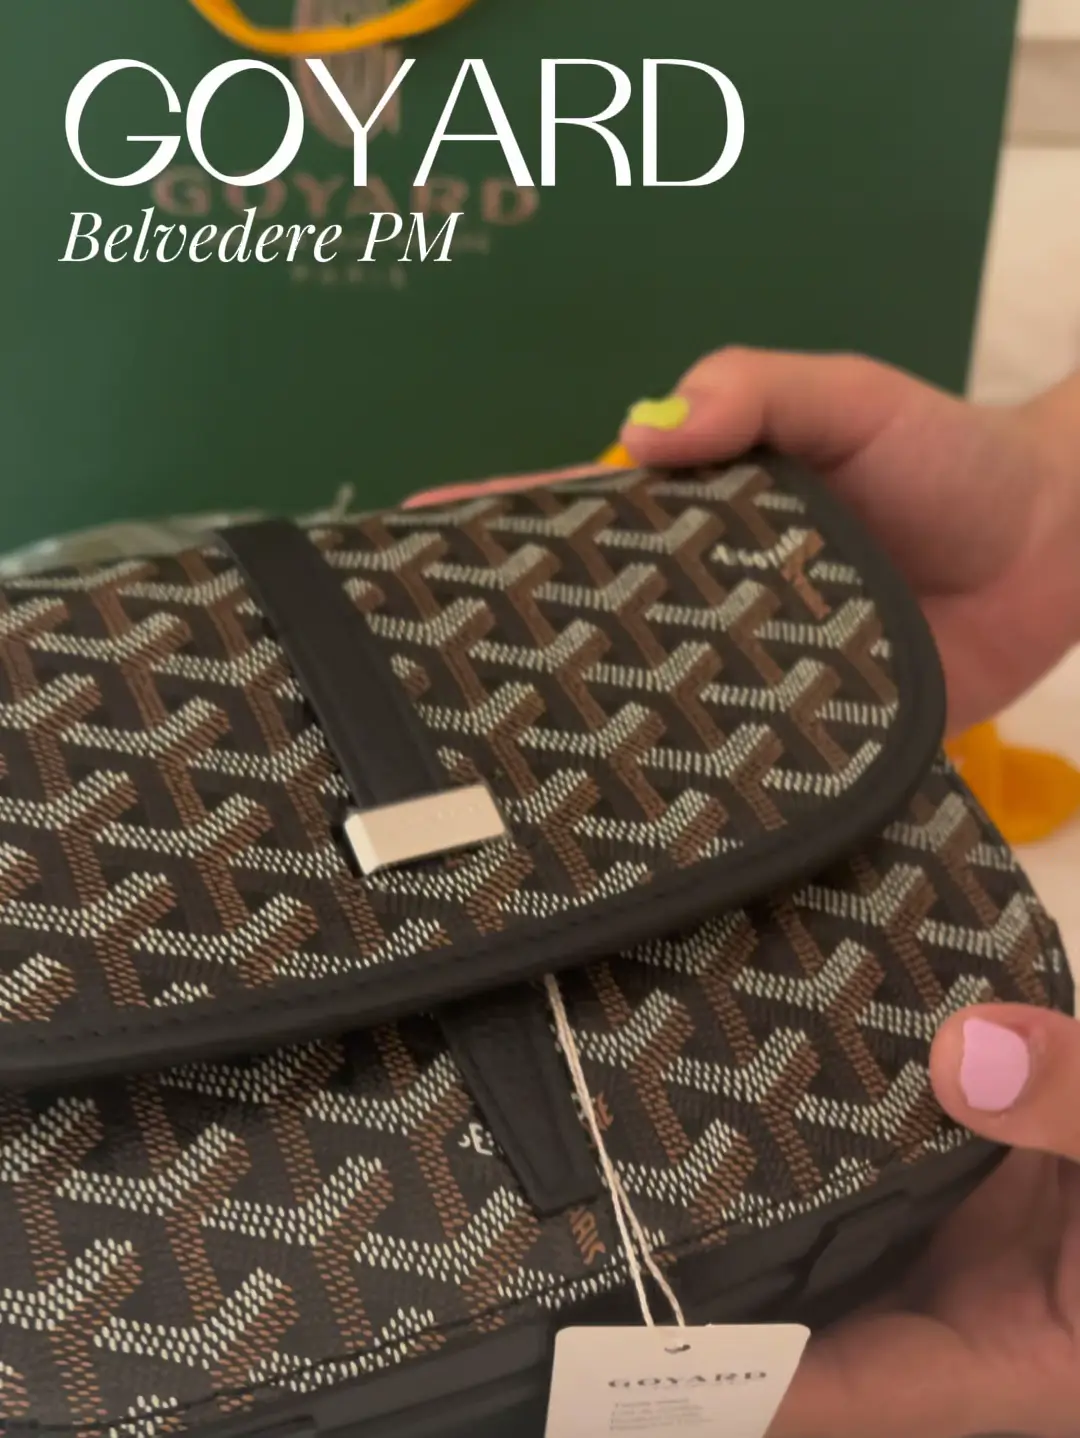 Unbox GOYARD BELVEDERE PM ✨, Article posted by Toey Vorawan